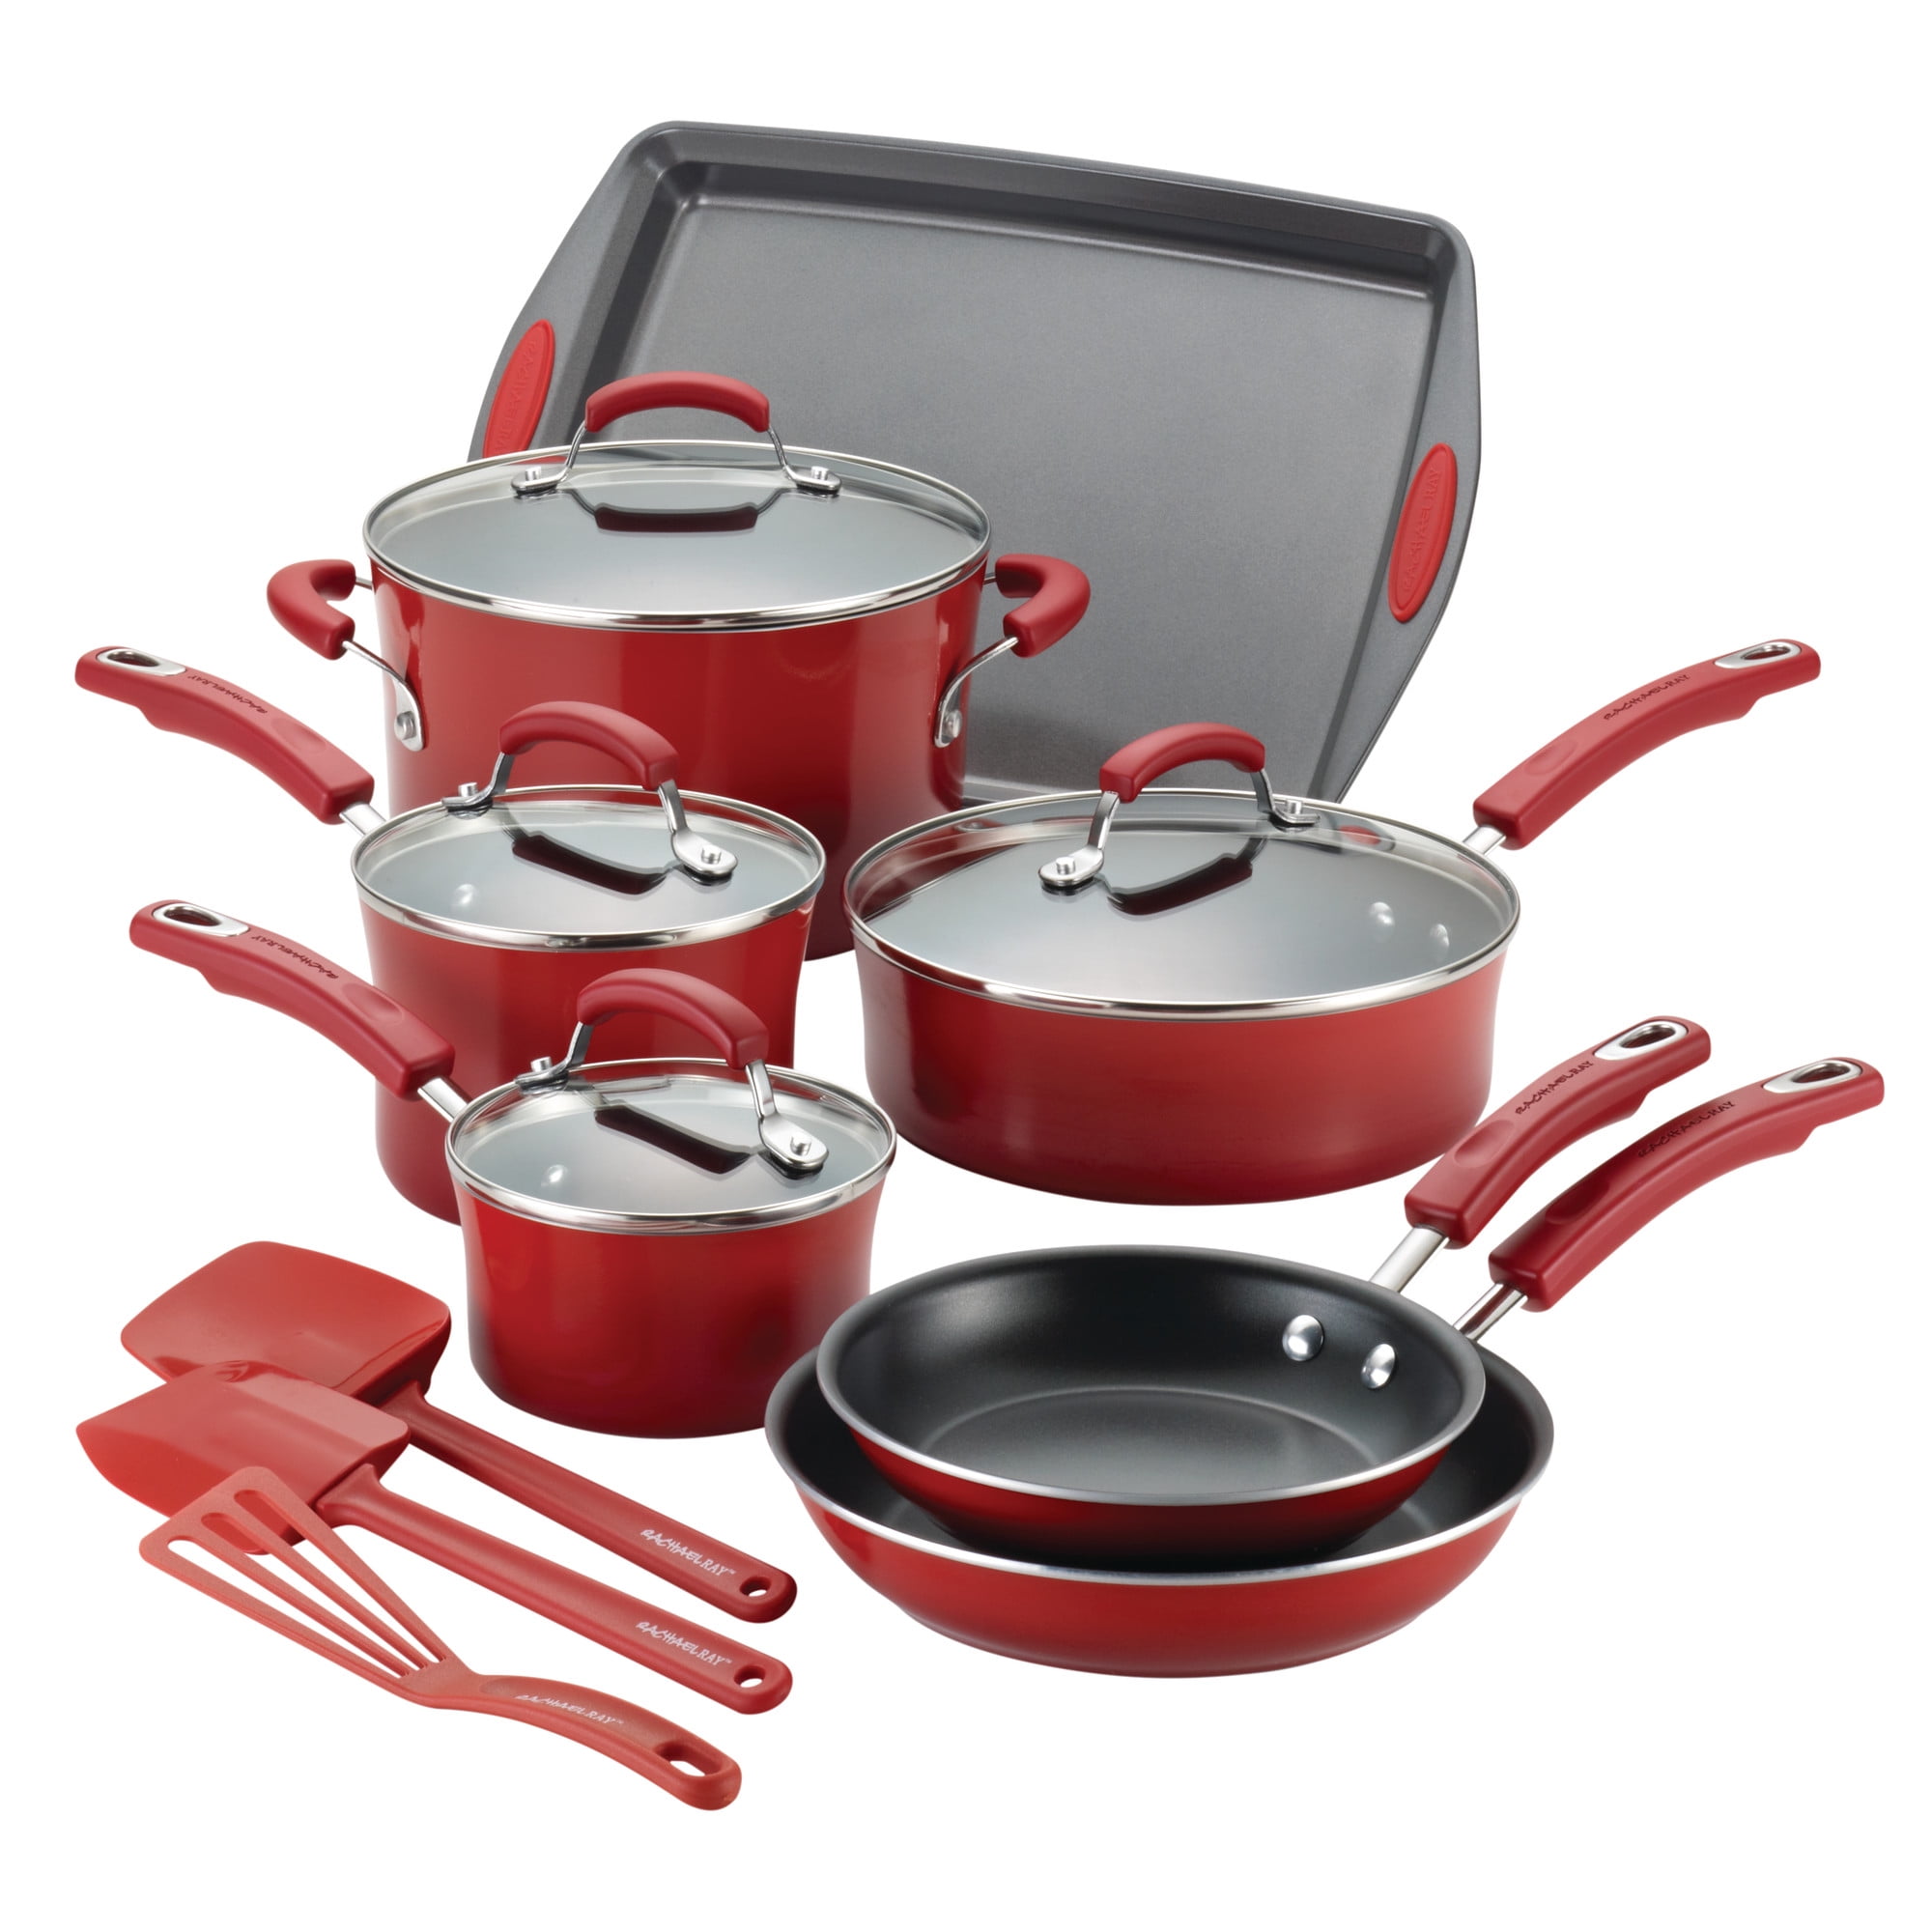 Rachael Ray 14-Piece Classic Bright's Nonstick Pots and Pans Set